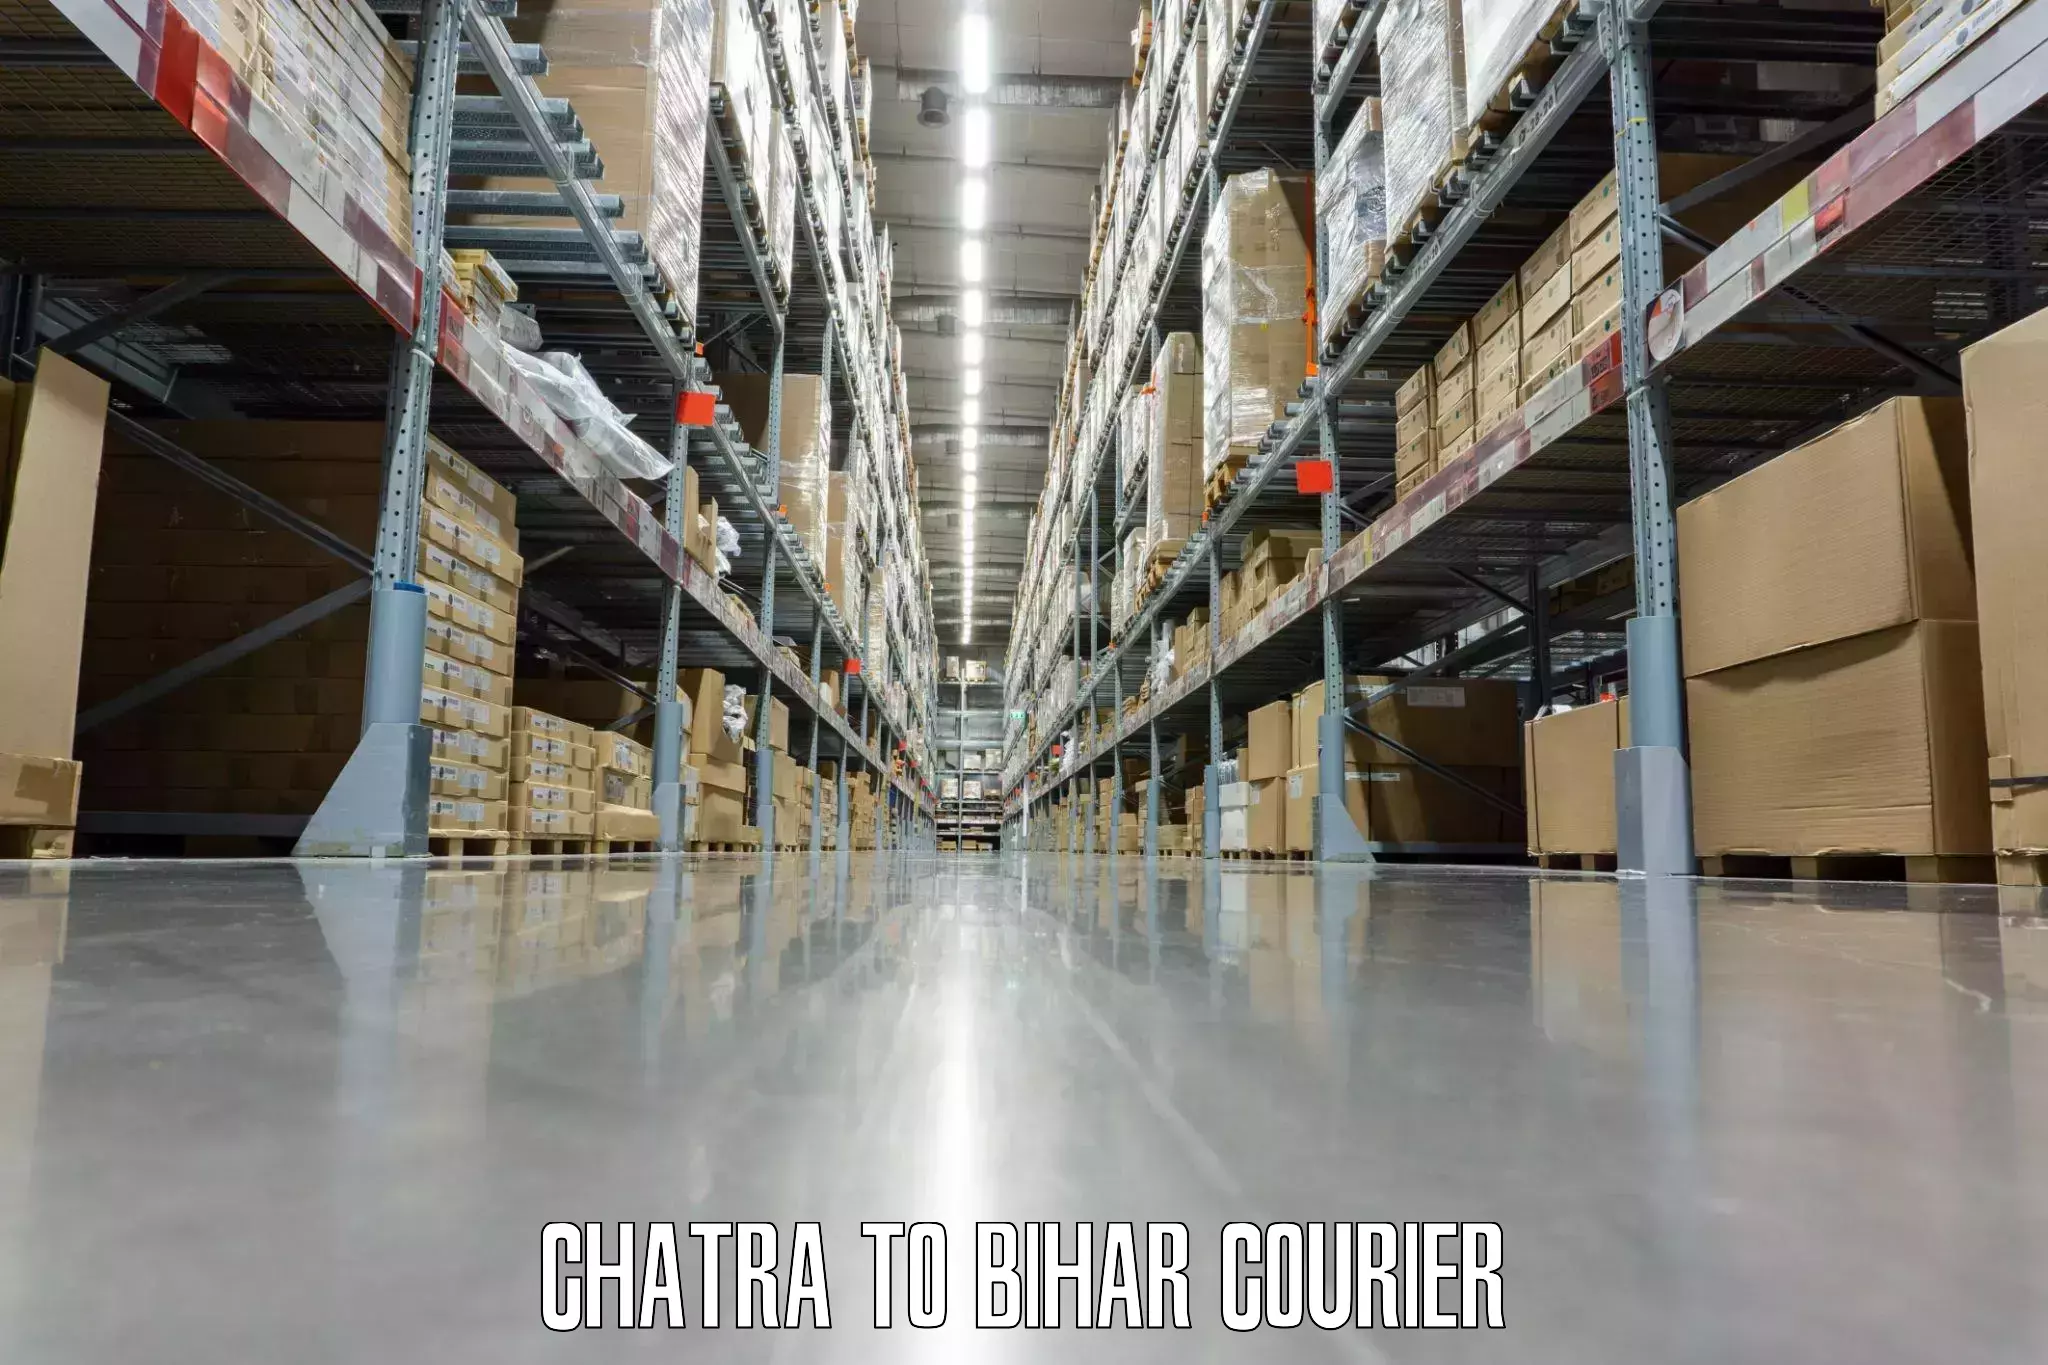 Luggage transport consultancy Chatra to Bihar